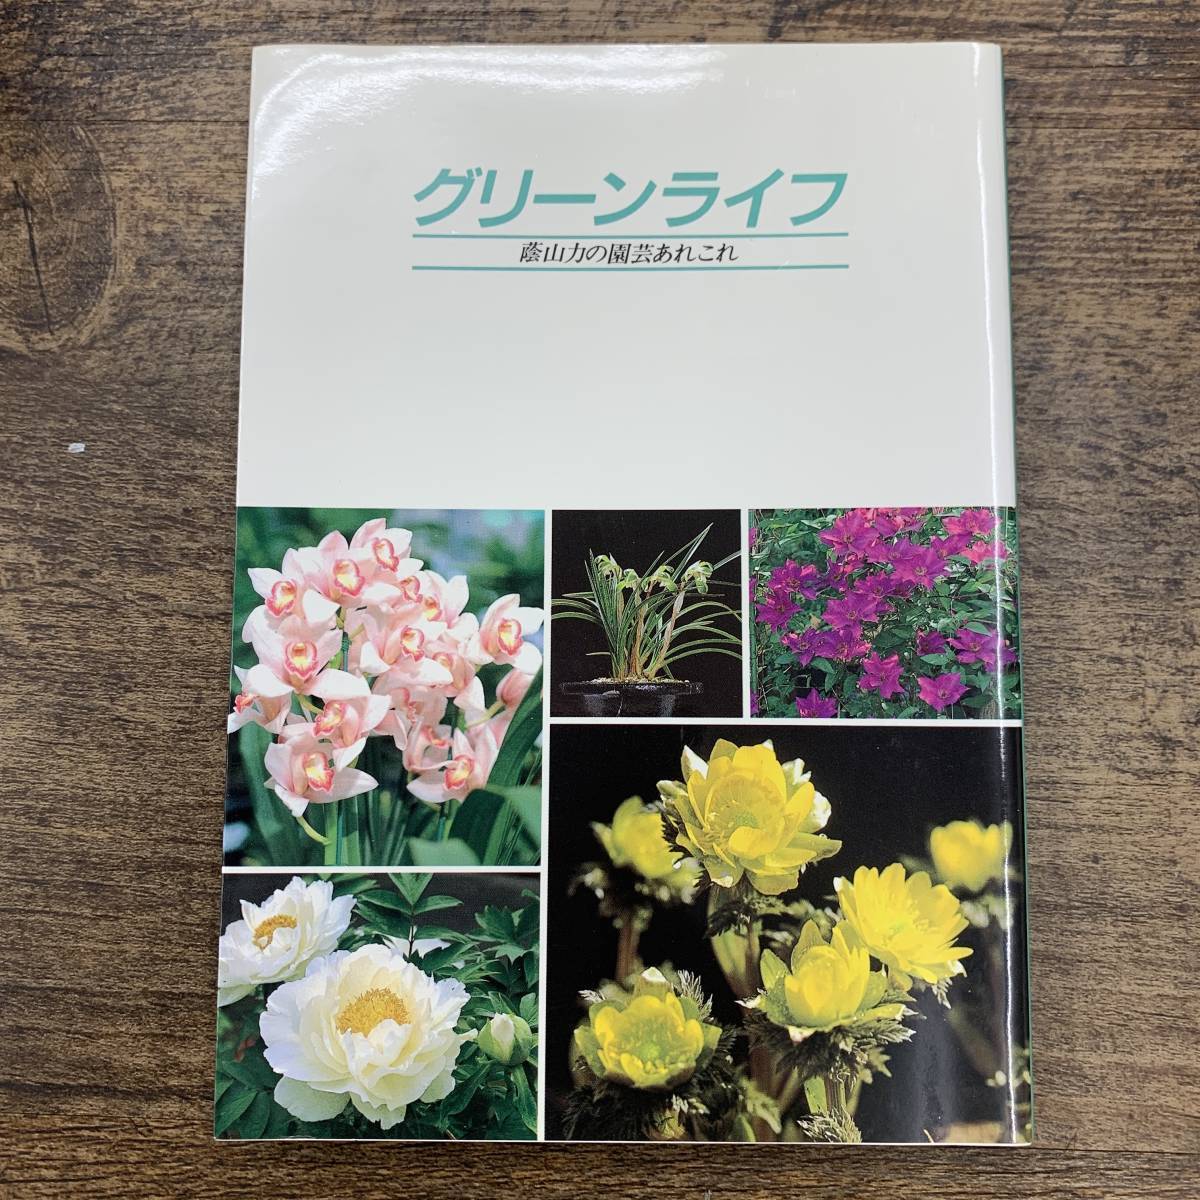 Z-1845# green life . mountain power. gardening .. this # white country. poetry # Tohoku electric power #(1987 year ) Showa era 62 year 9 month 4 day issue 